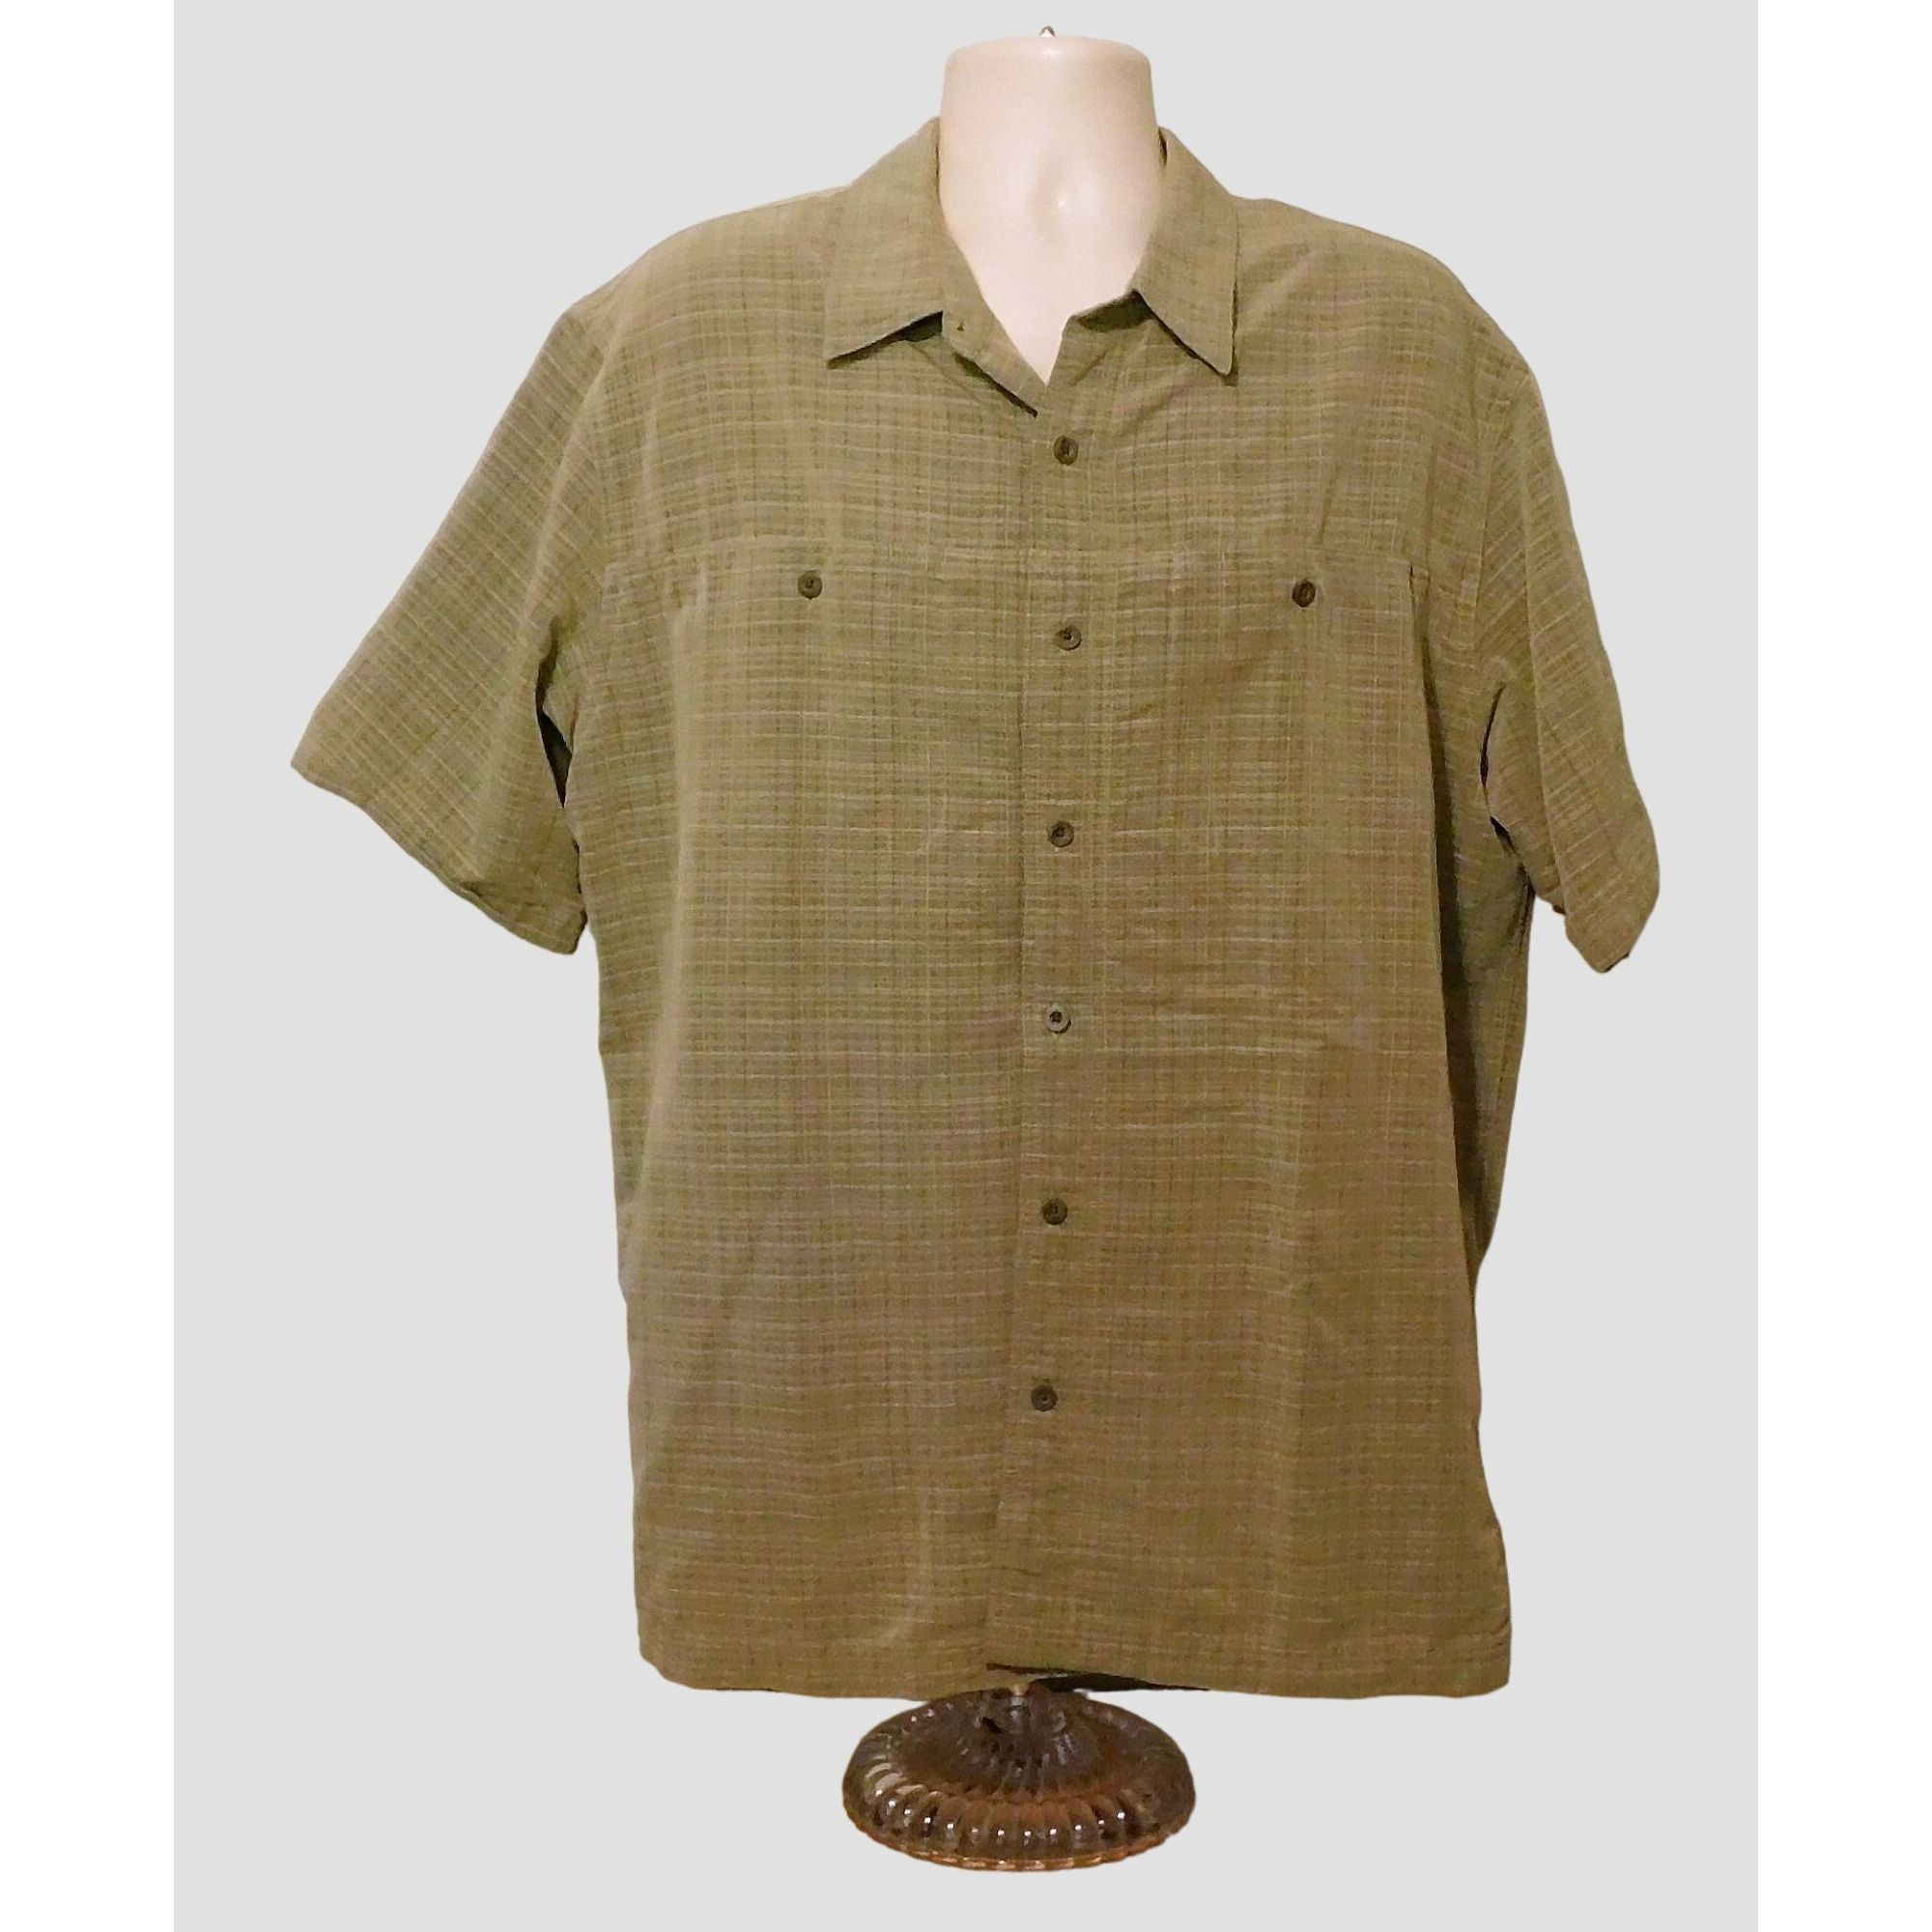 Other 5.11 Tactical Shirt XL Concealed Carry Green Plaid Short Slv Size US XL / EU 56 / 4 - 6 Thumbnail